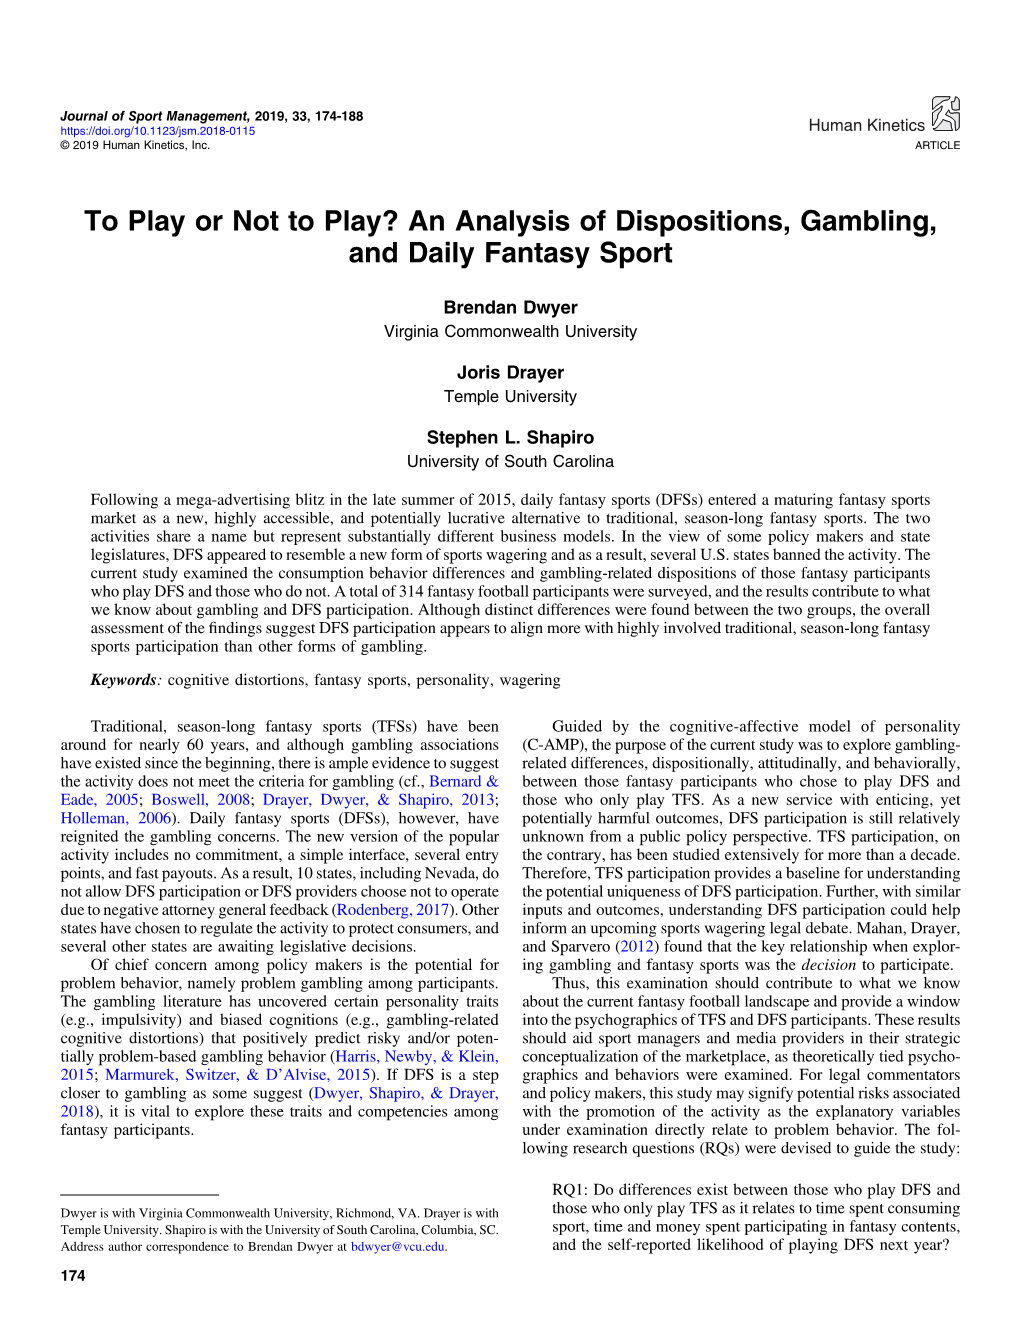 An Analysis of Dispositions, Gambling, and Daily Fantasy Sport